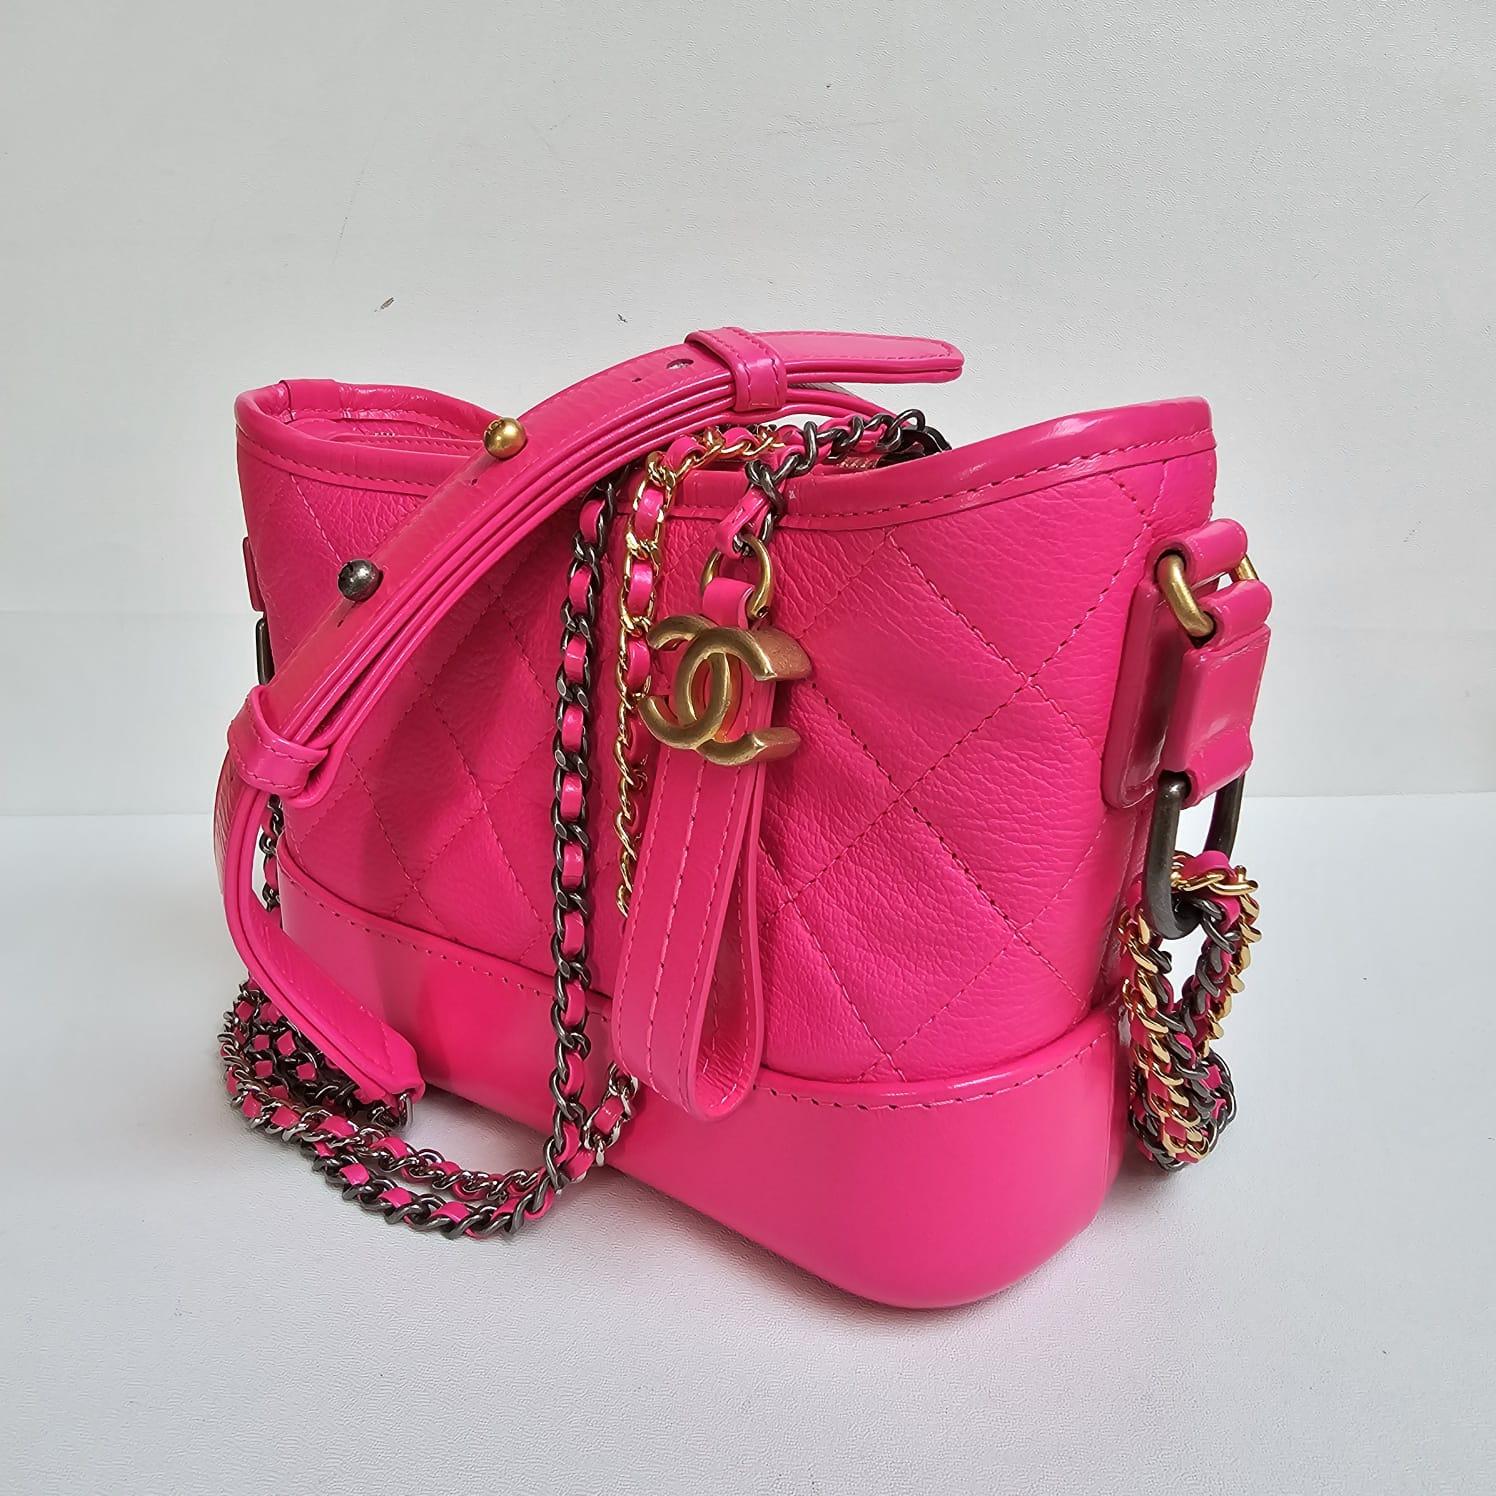 Chanel Neon Pink Small Gabrielle Bag For Sale 6